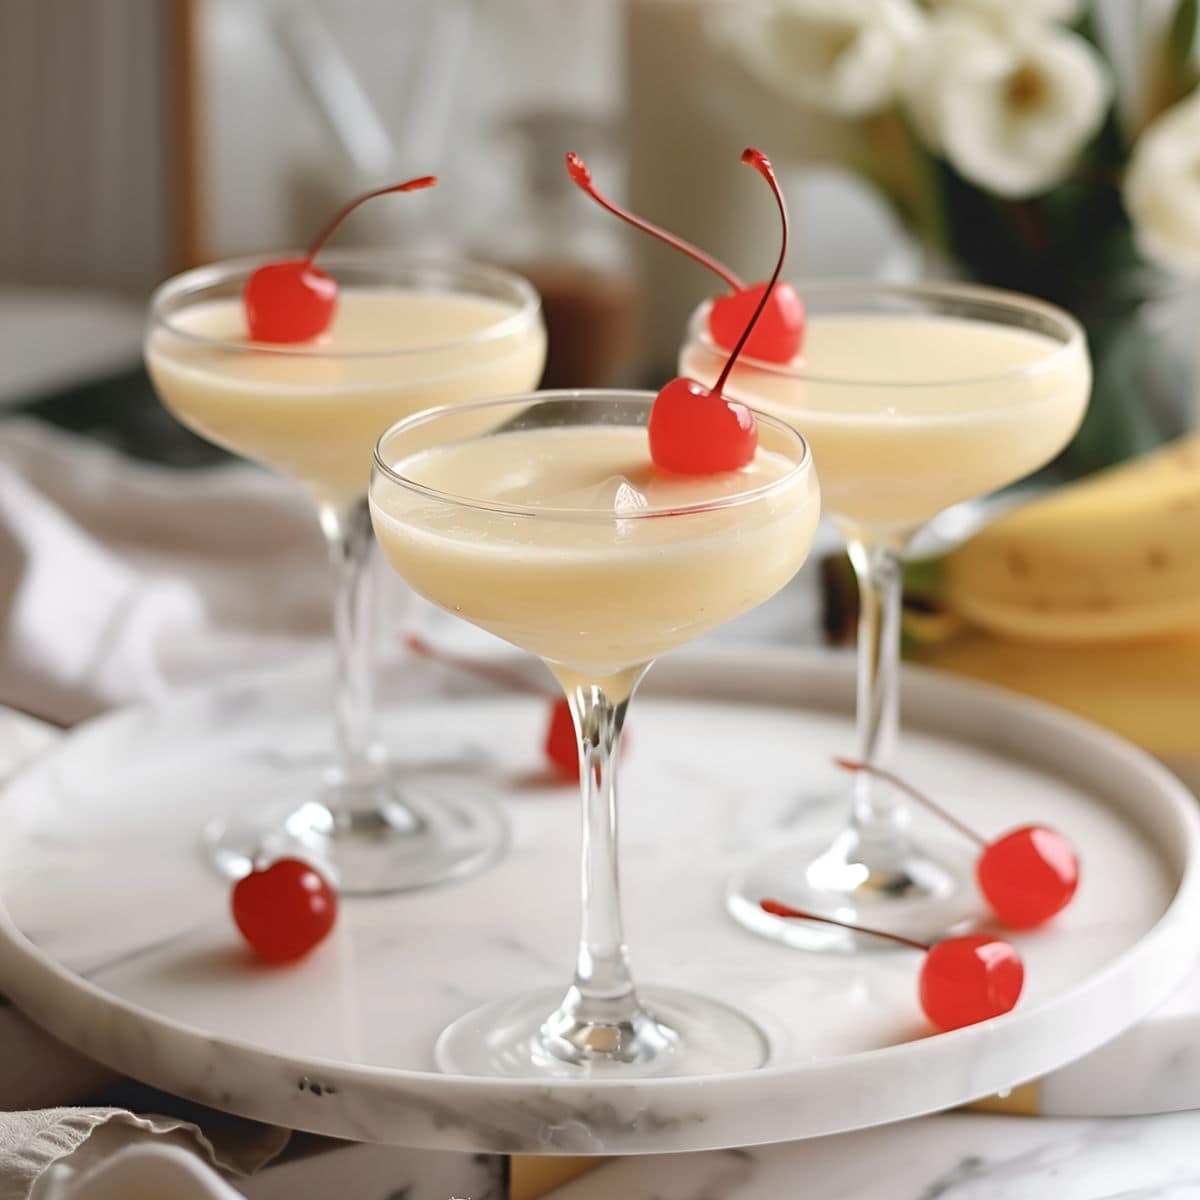 Three Banana Daiquiris in Glasses with Maraschino Cherries on a White marble Serving Tray